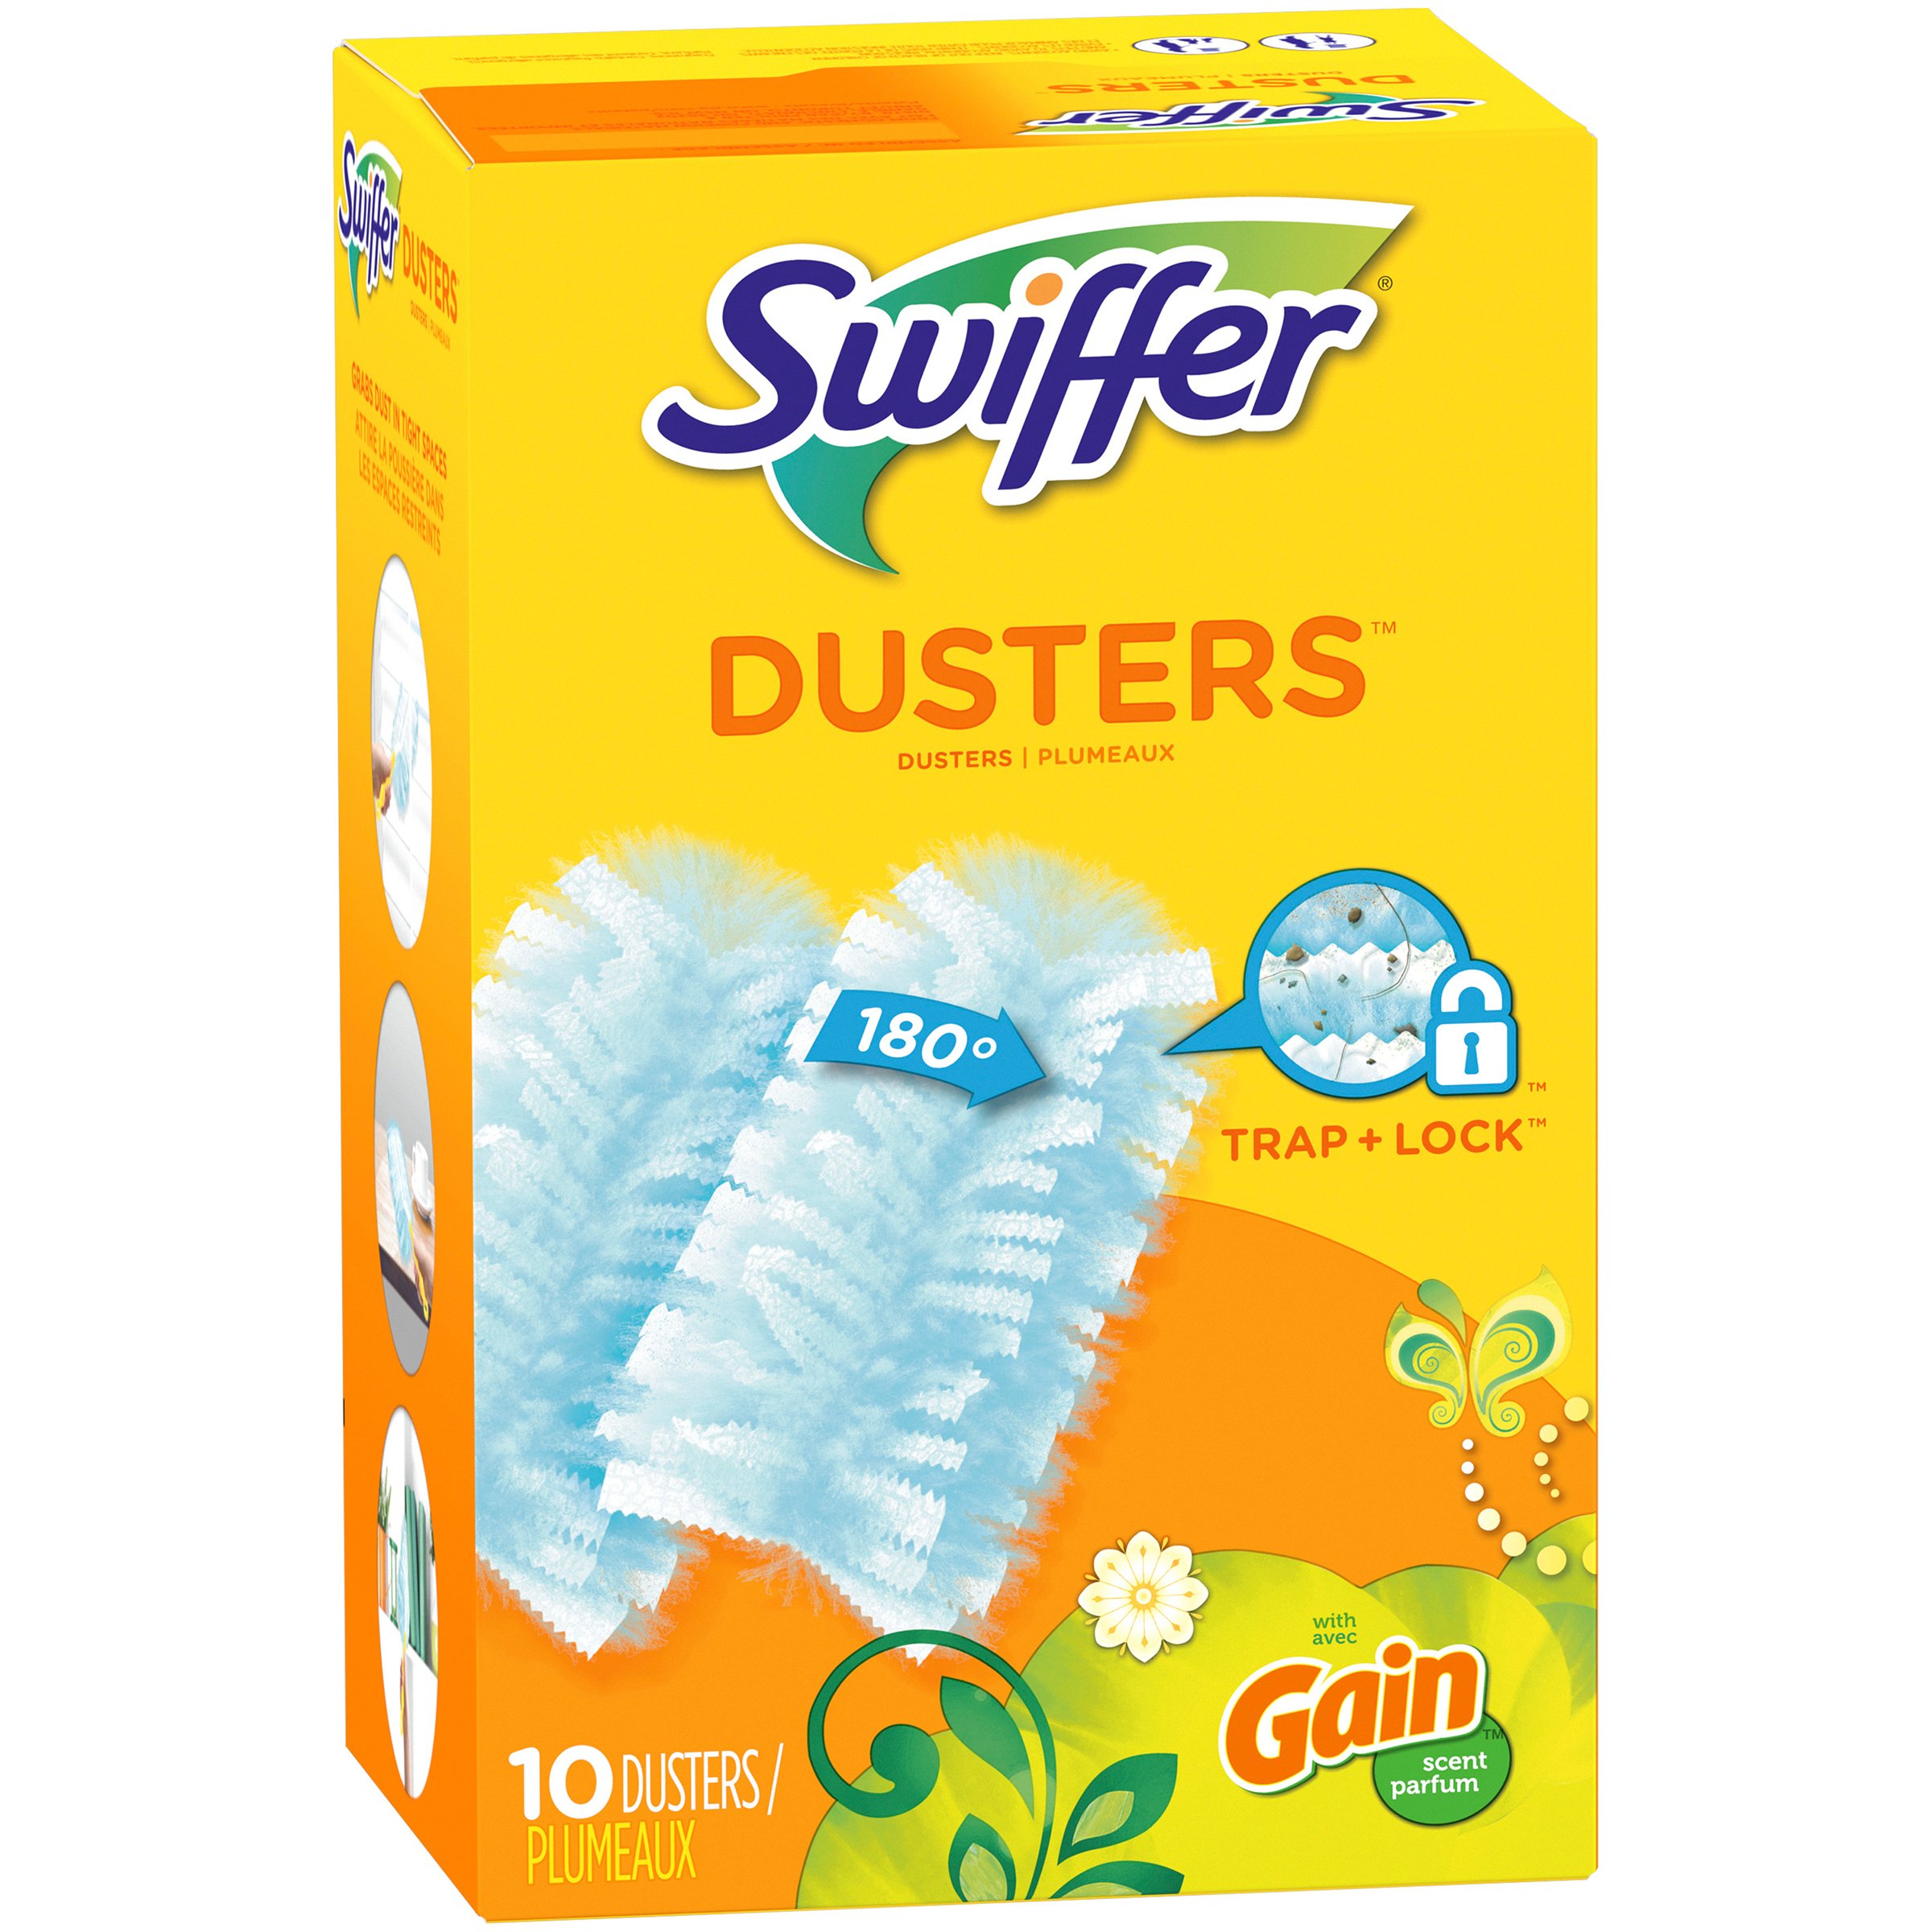 Swiffer Duster Gain Original Scent Multi-Surface Refills - Shop Cleaning  Cloths & Dusters at H-E-B